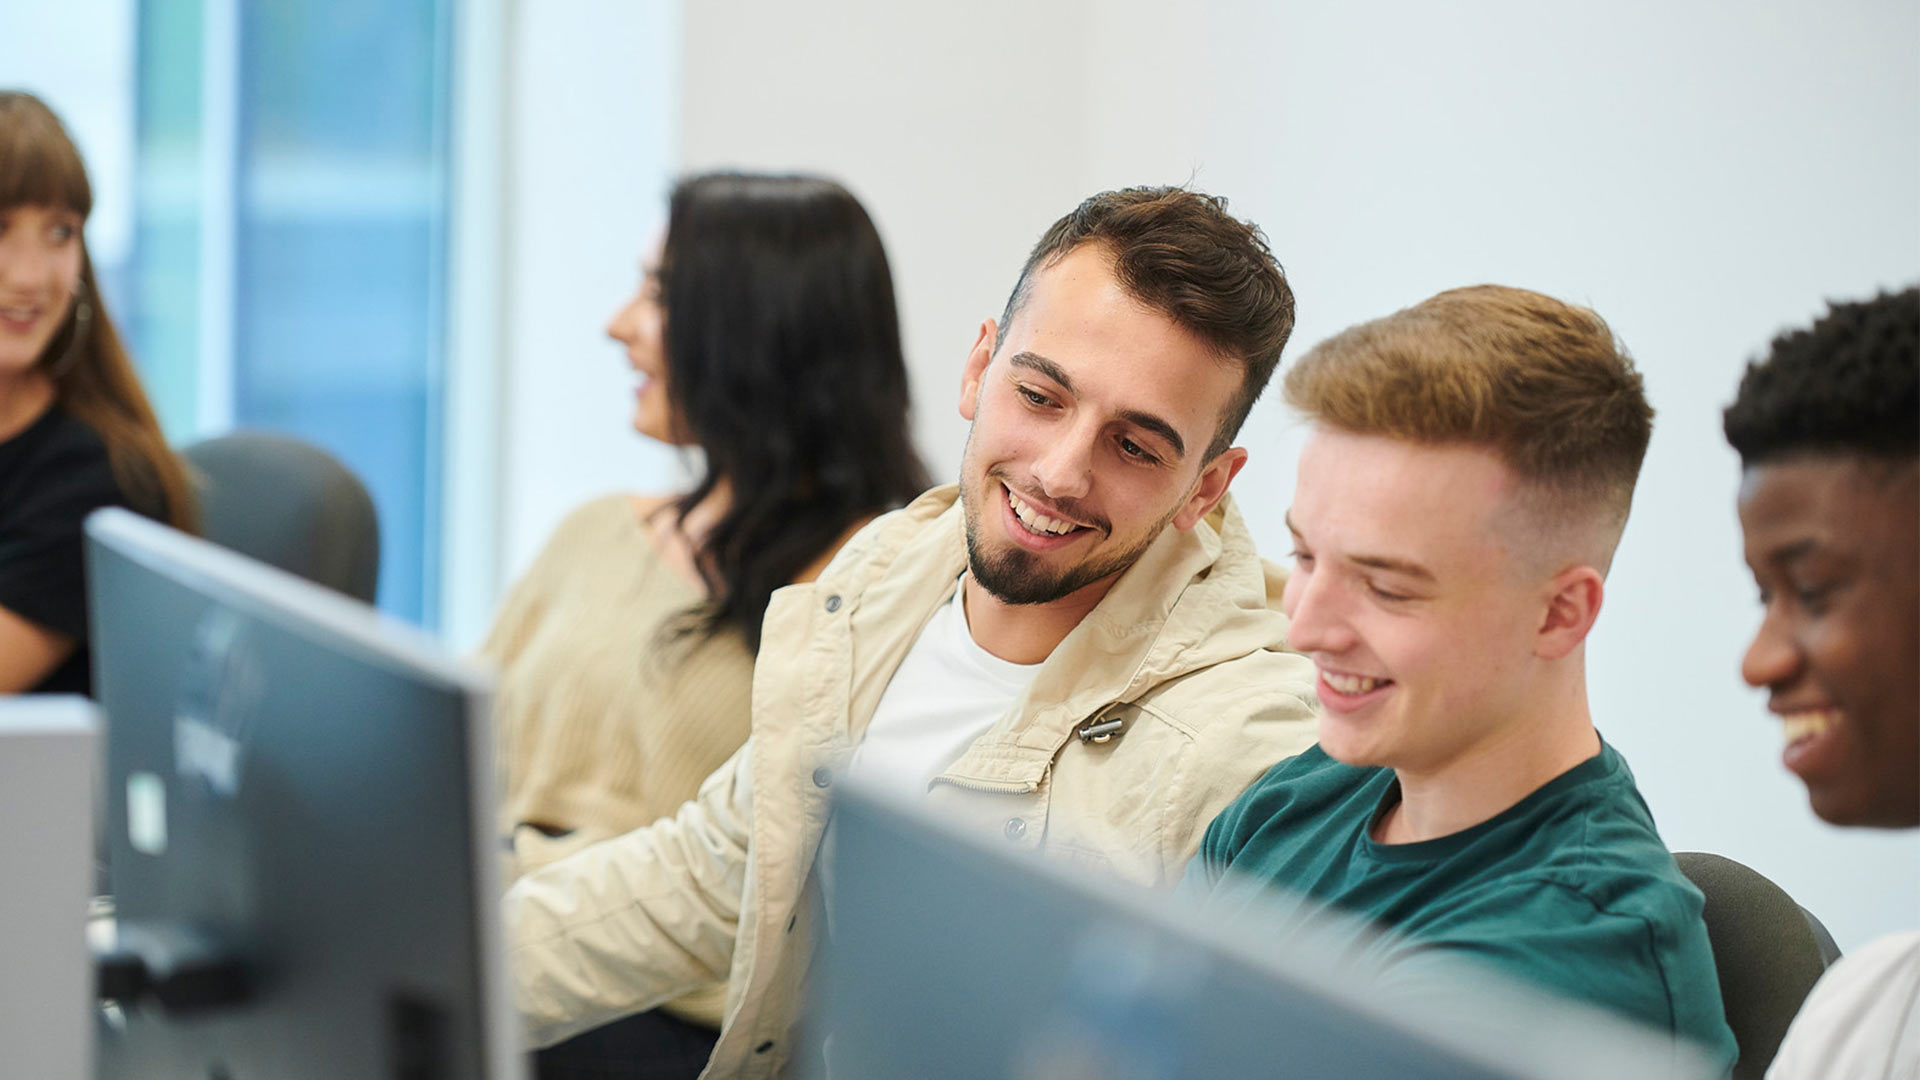 Students smiling and working at a computer.